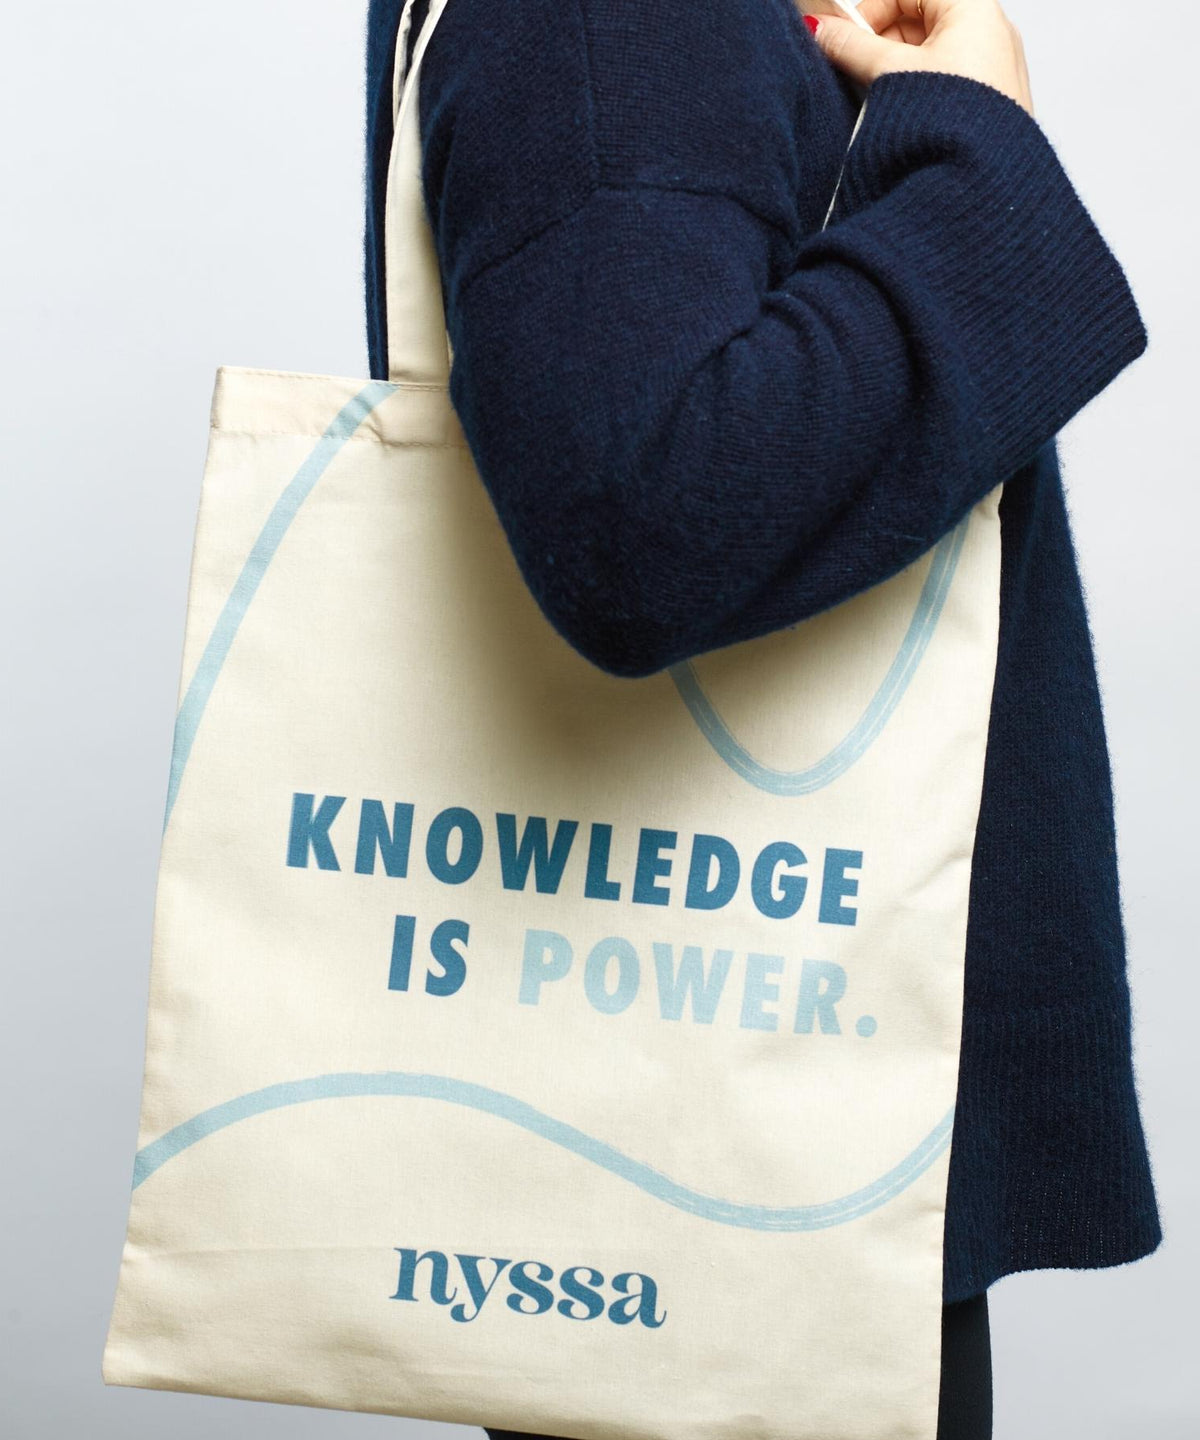 Knowledge is Power Tote - Nyssa